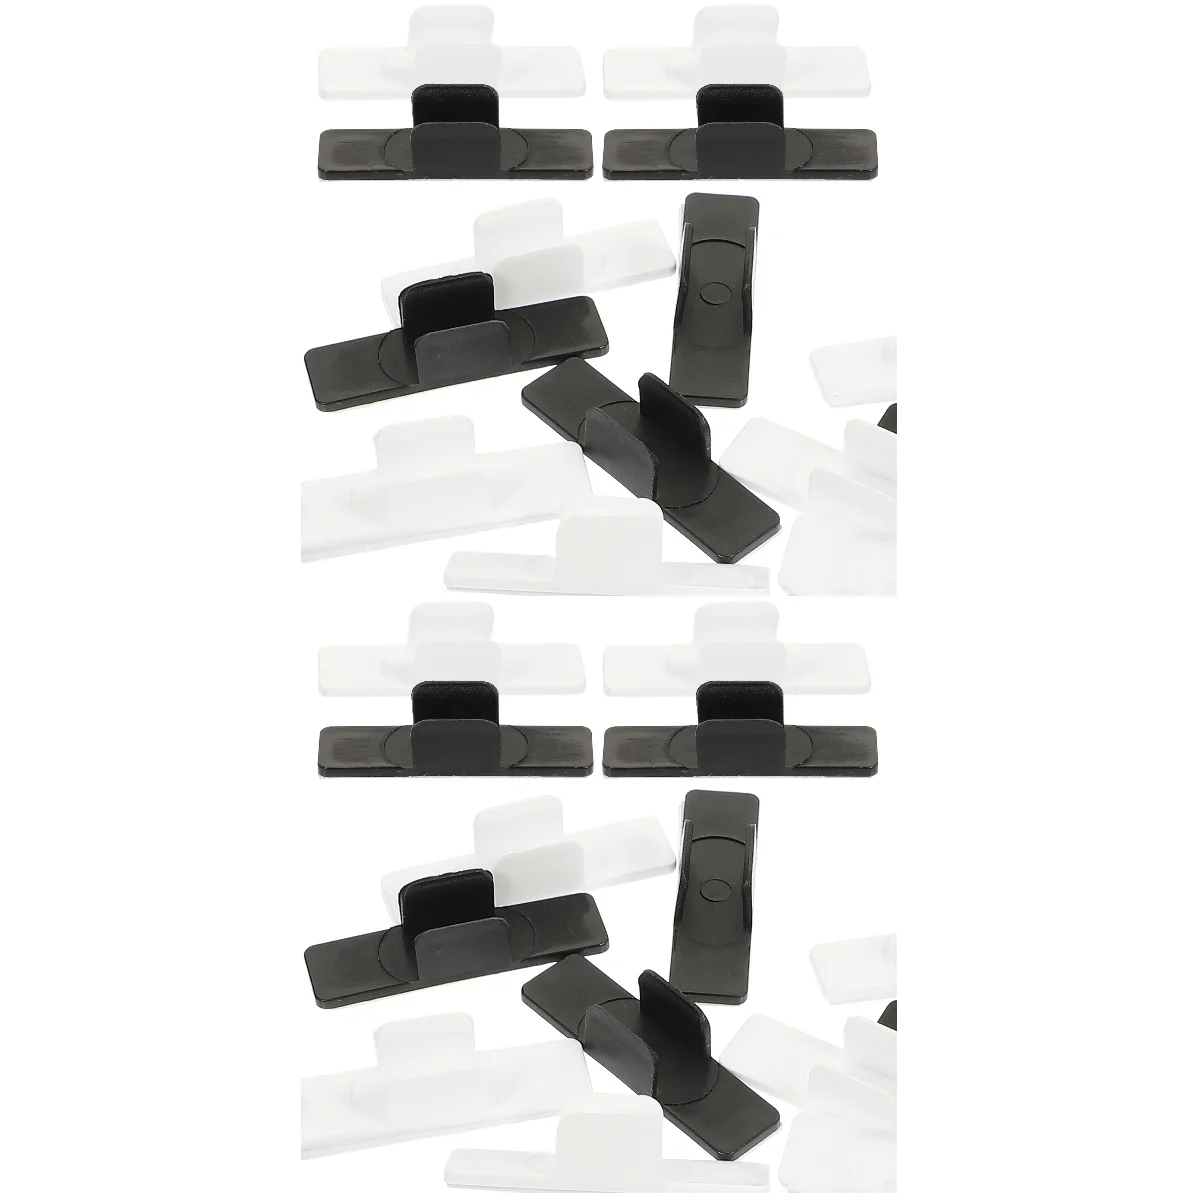 

40 Pcs Penholder Plastic Stand Fixing Clamp Whiteboard Buckles Abs Clip Office Holders Clamps